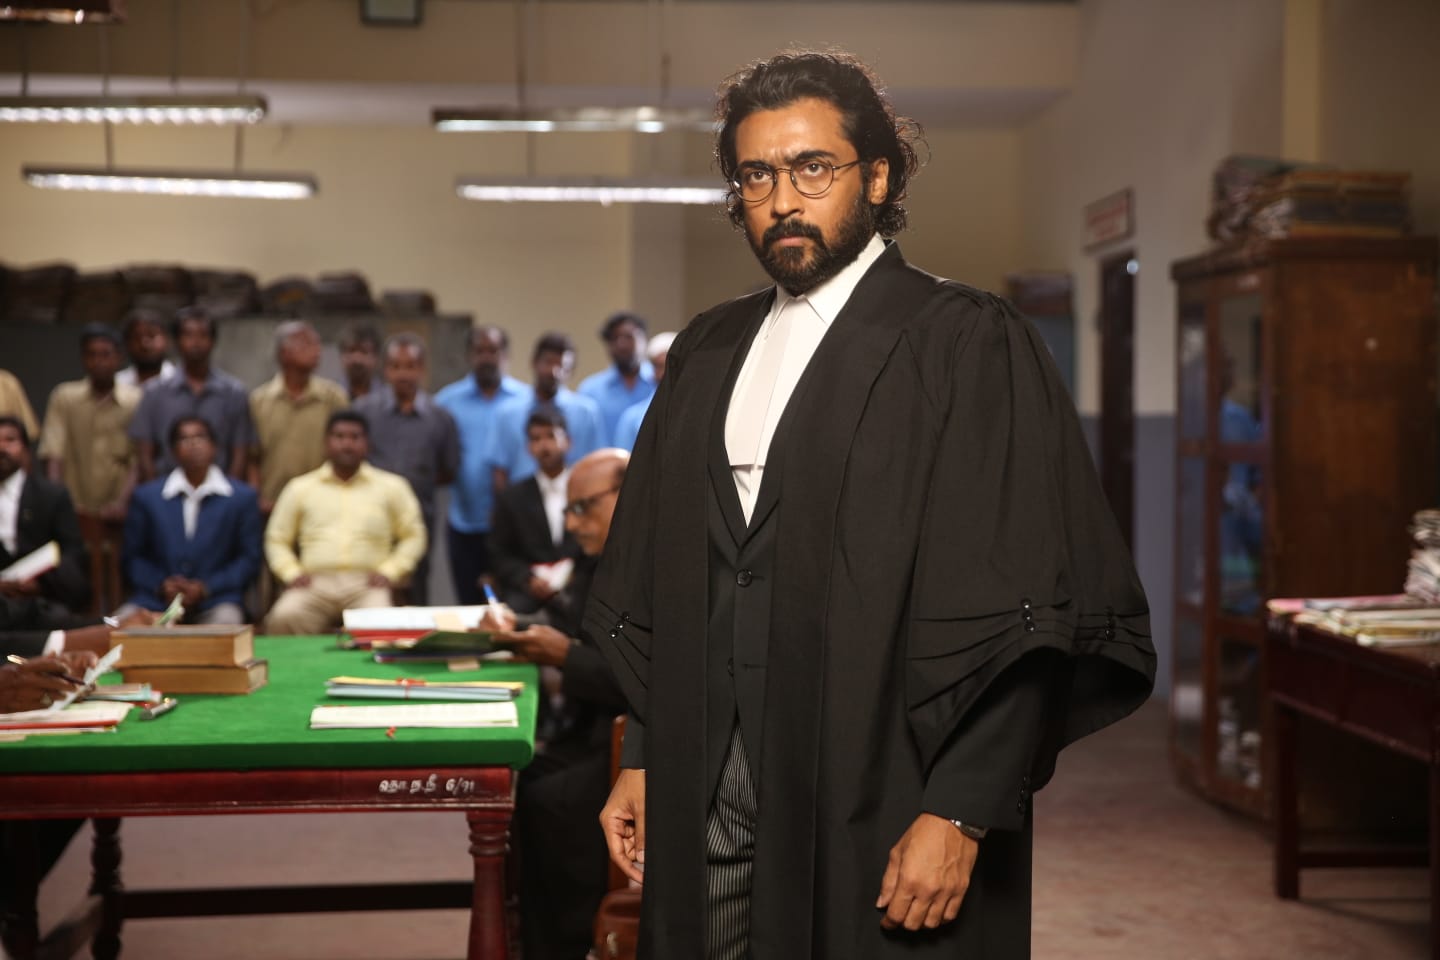 Suriya plays a lawyer for the first time in his career in #JaiBhim!